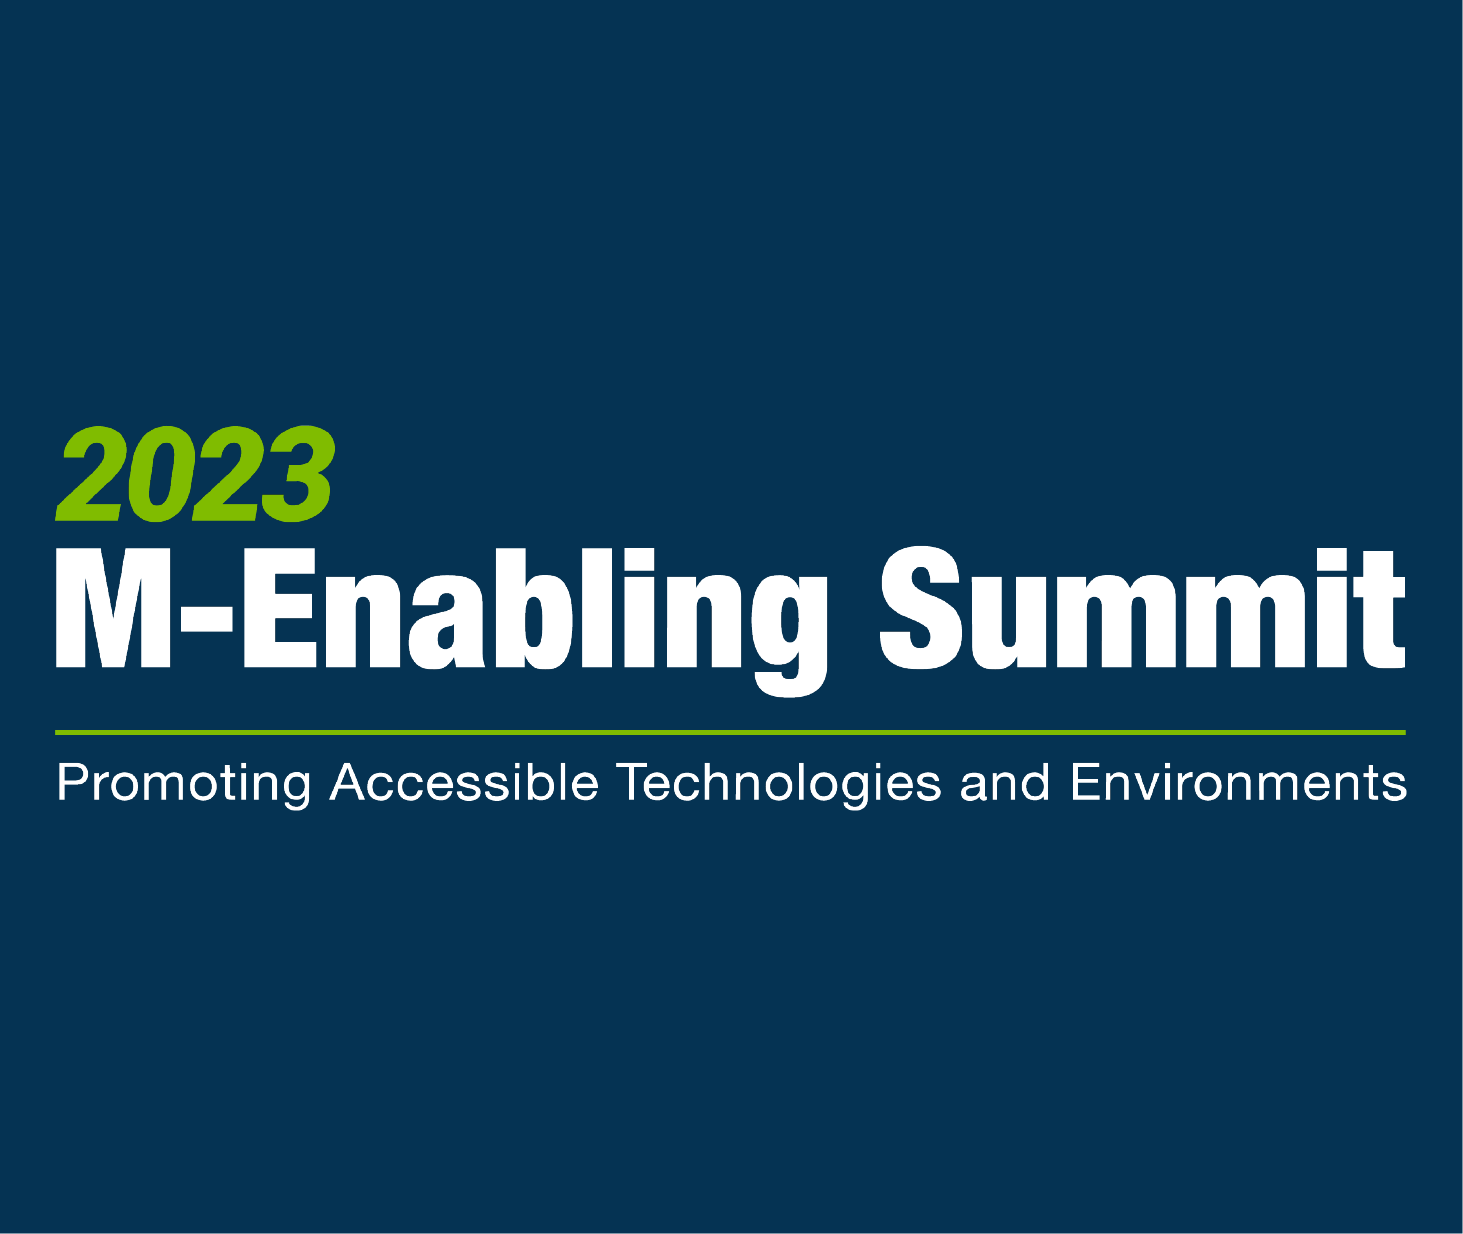 2023 M-Enabling Summit. Promoting accessible technologies and environments.